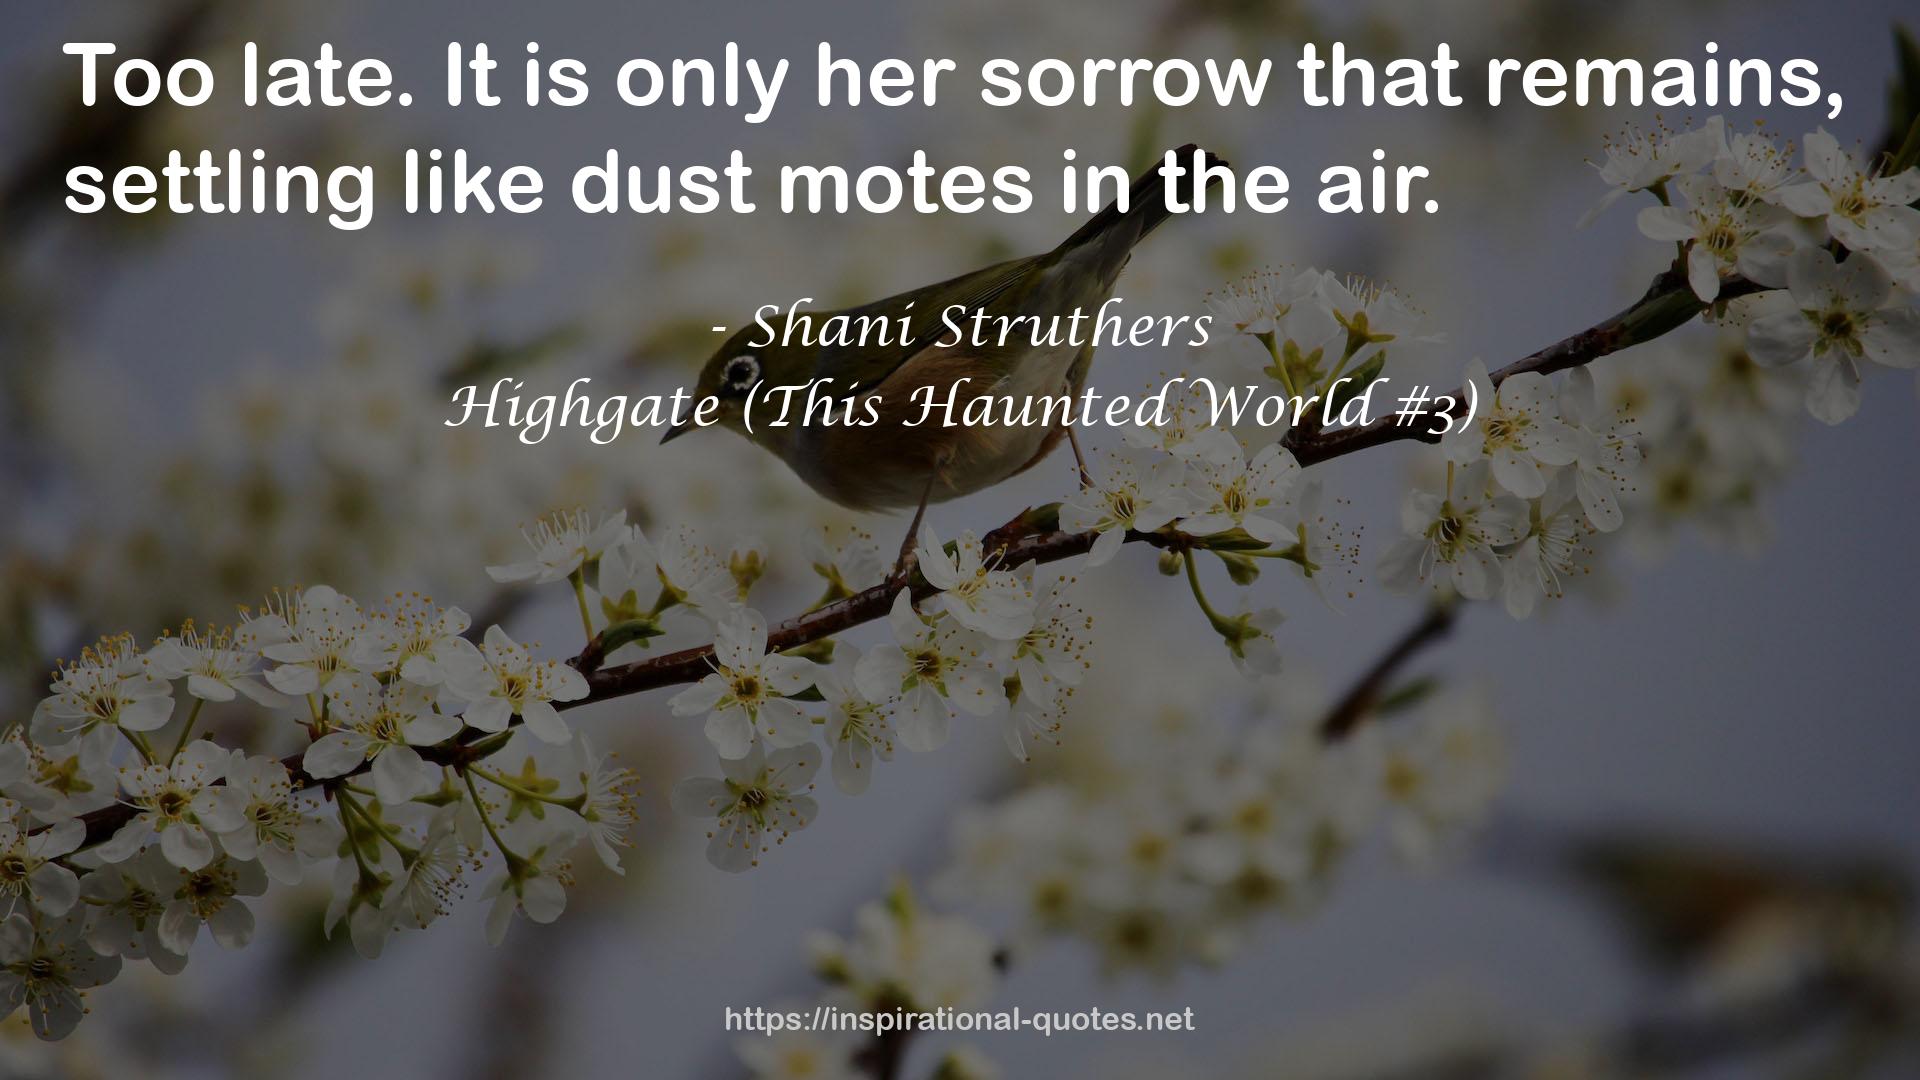 Highgate (This Haunted World #3) QUOTES